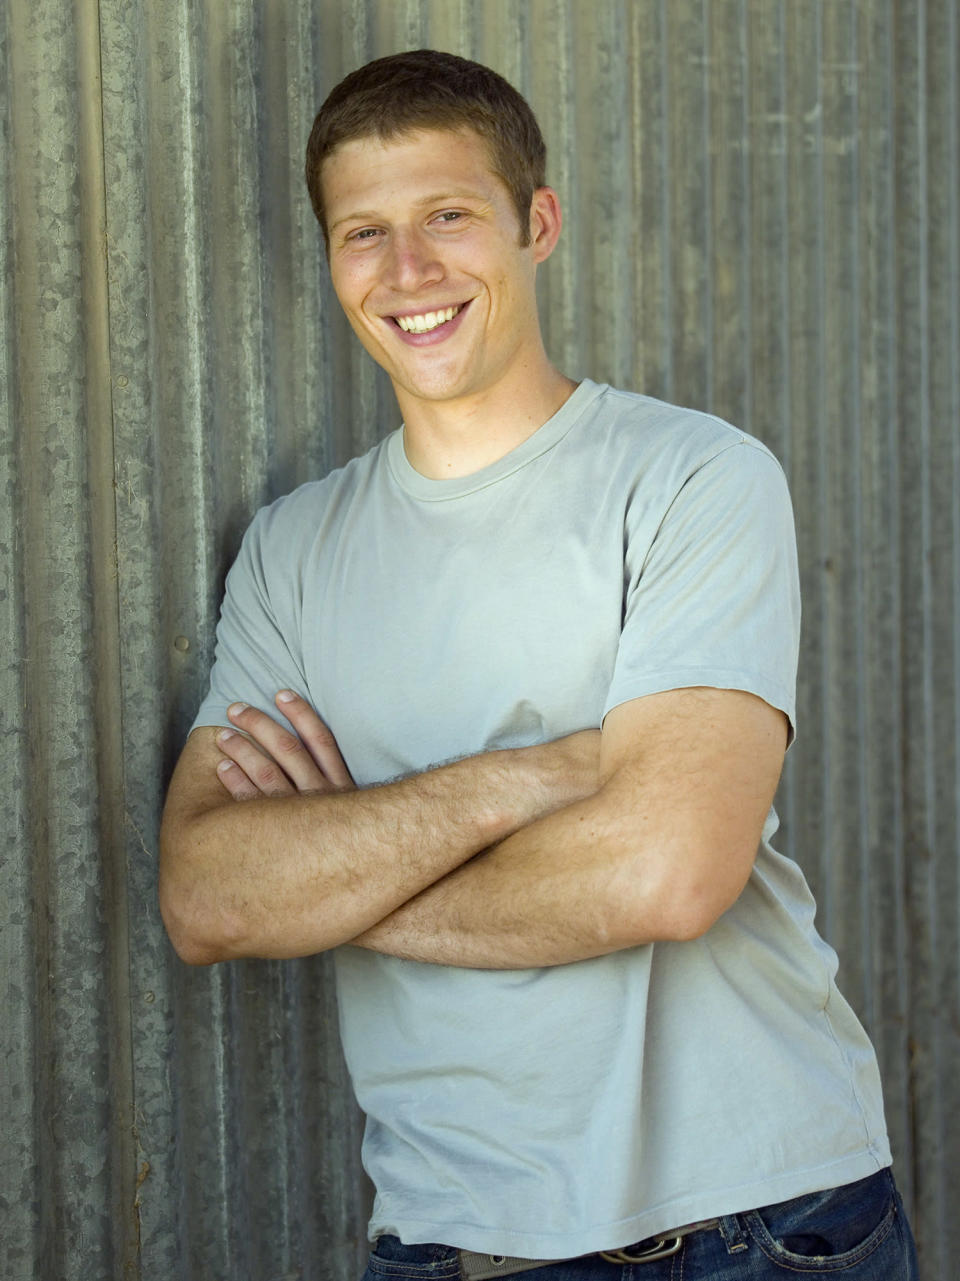 <b>Zach Gilford</b><br><br> Is it just us, or did the football players on "Friday Night Lights" look way too old to be in high school? It must be all those muscles. Not surprisingly, the charge was led by Zach Gilford, who was 24 years old when he started playing sophomore quarterback Matt Saracen in 2006.